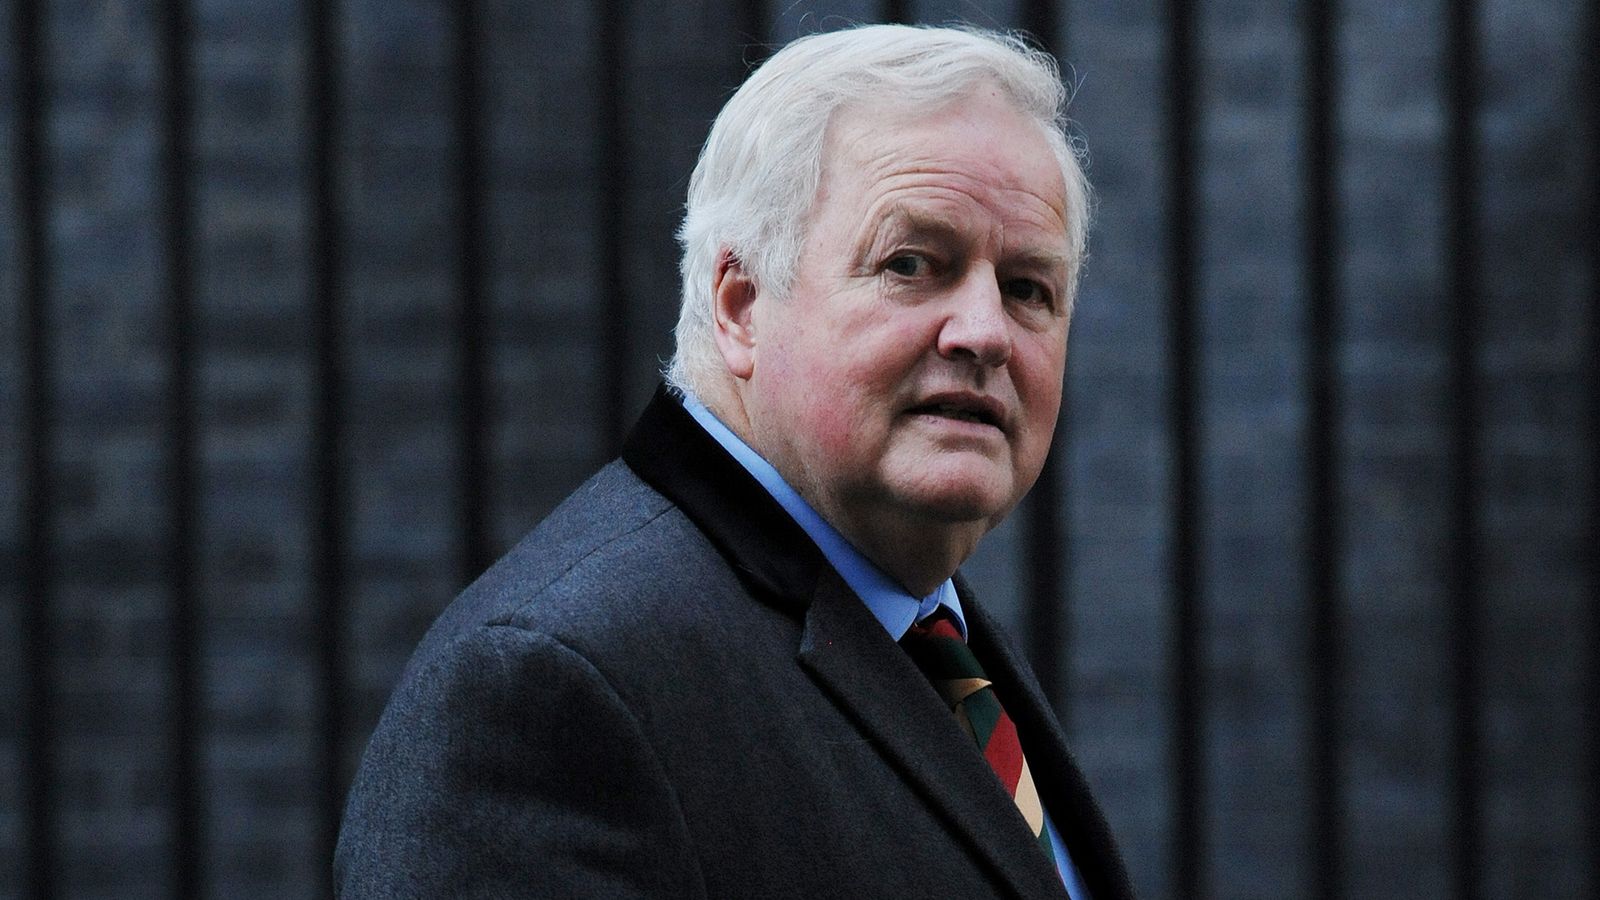 Tory MP Bob Stewart who told activist 'go back to Bahrain' found guilty of racial abuse